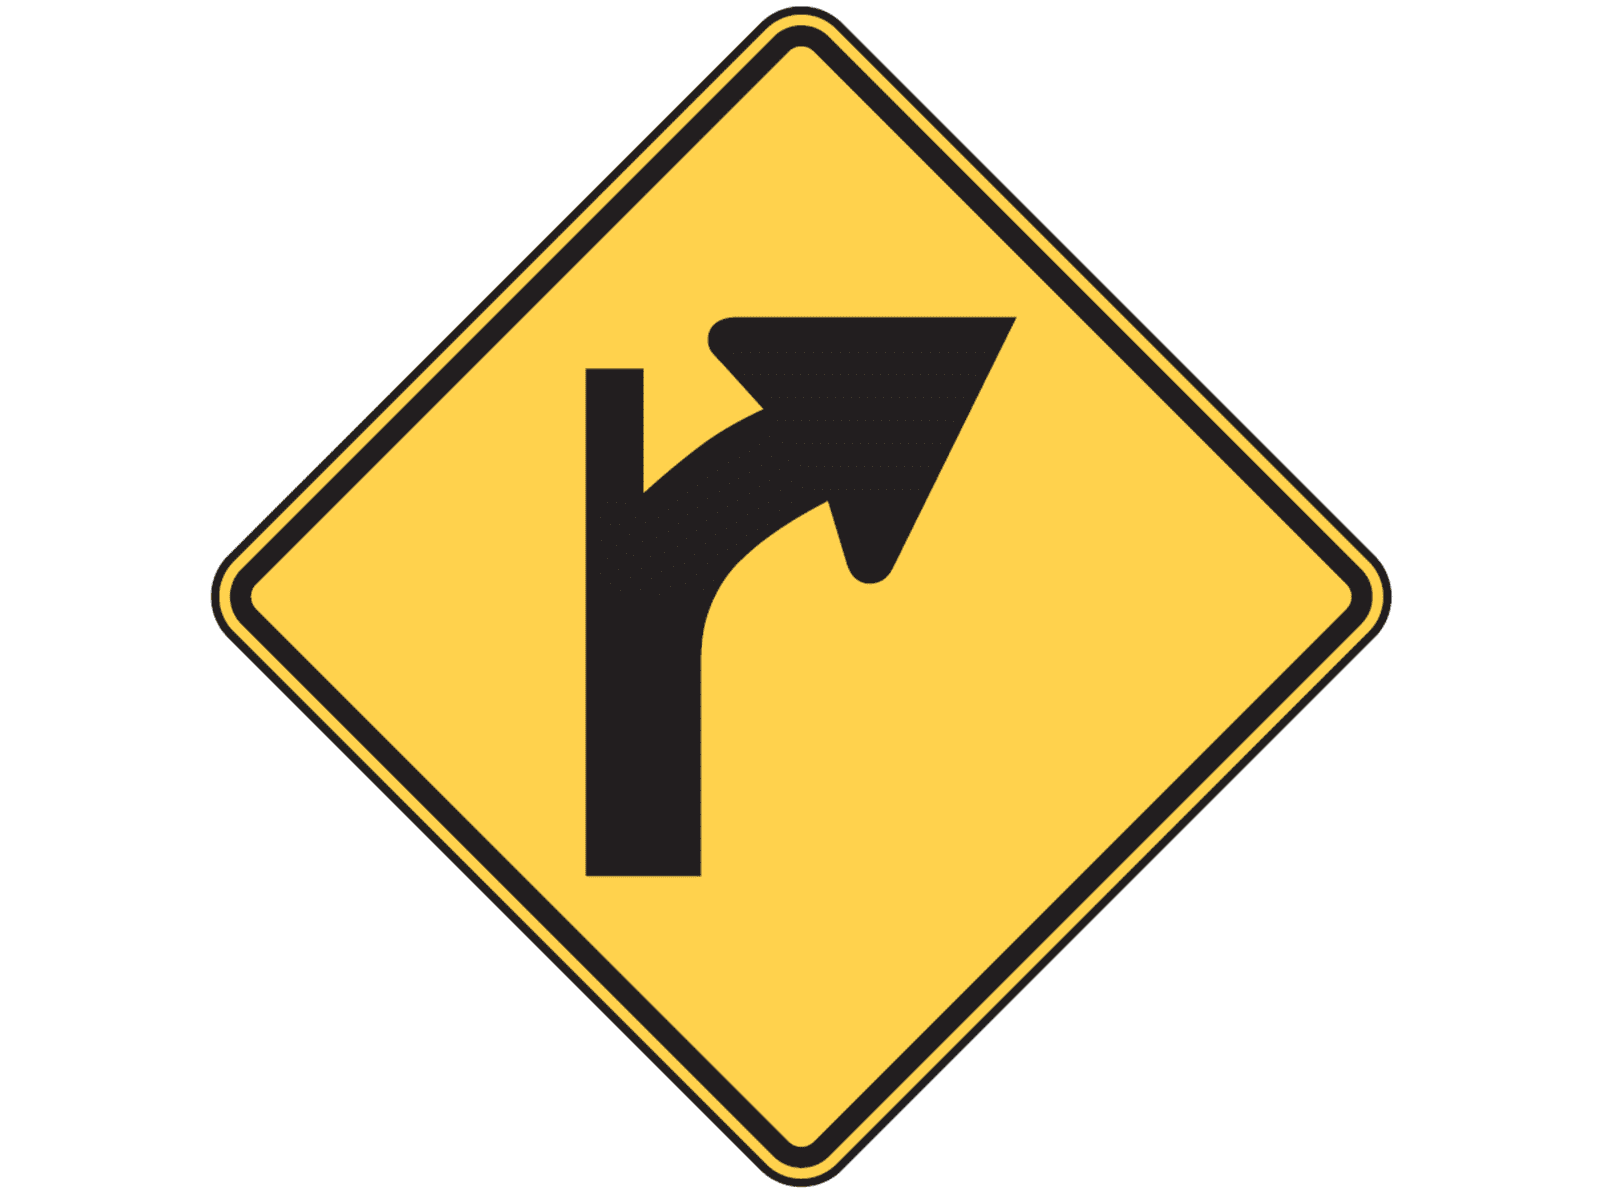 Curve or keep straight W1-10b - W1: Curves and Turns